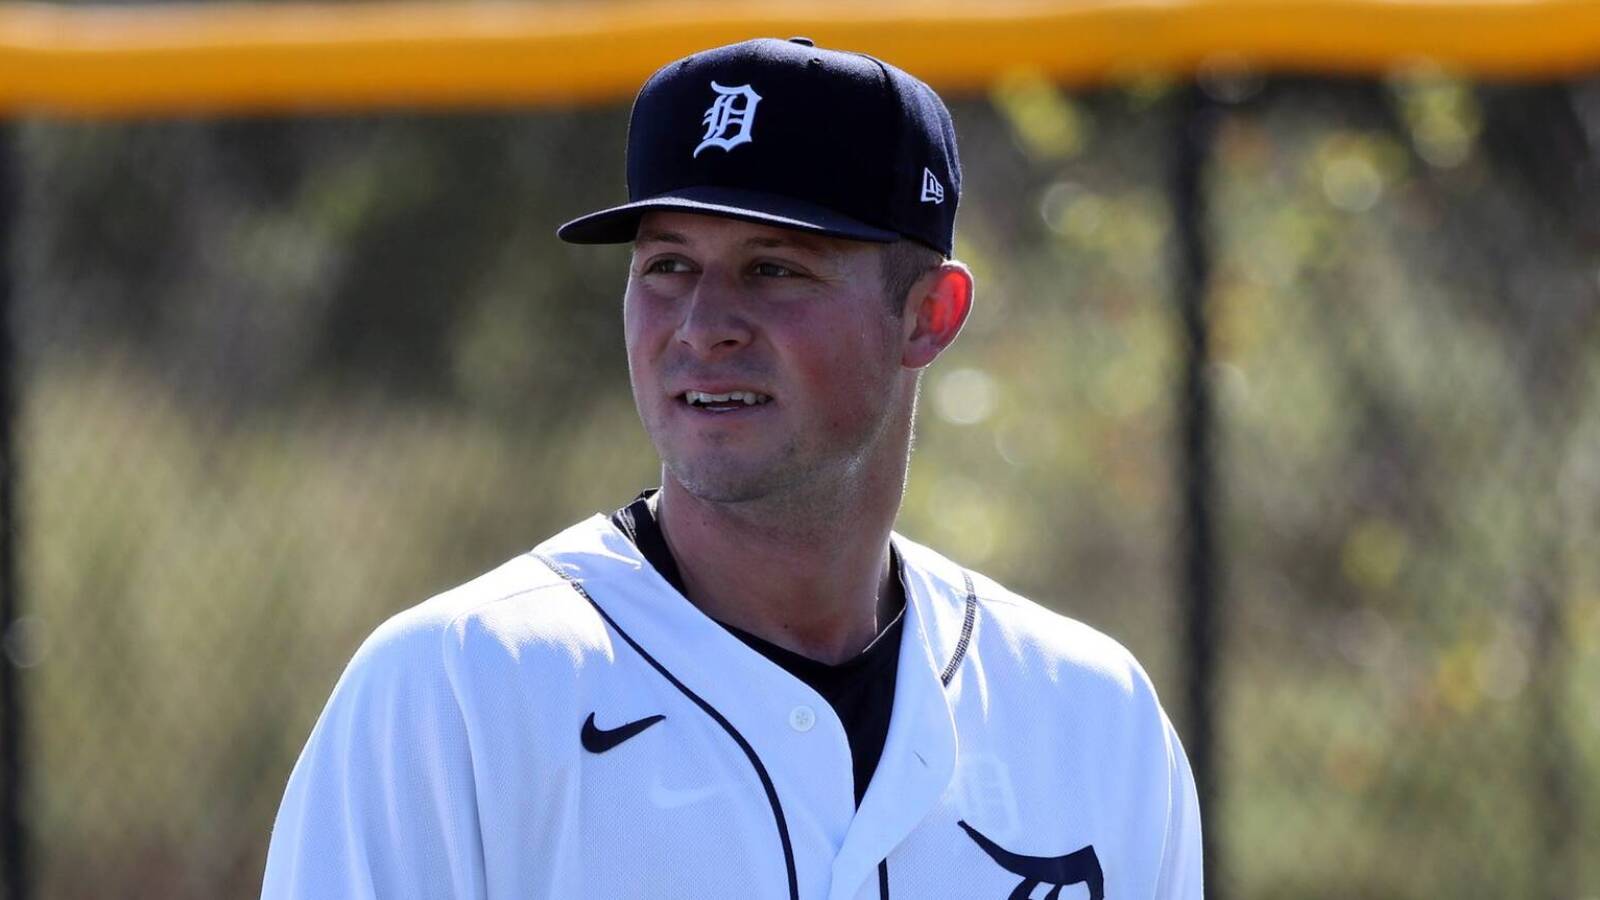 Tigers view Spencer Torkelson solely as 1B going forward